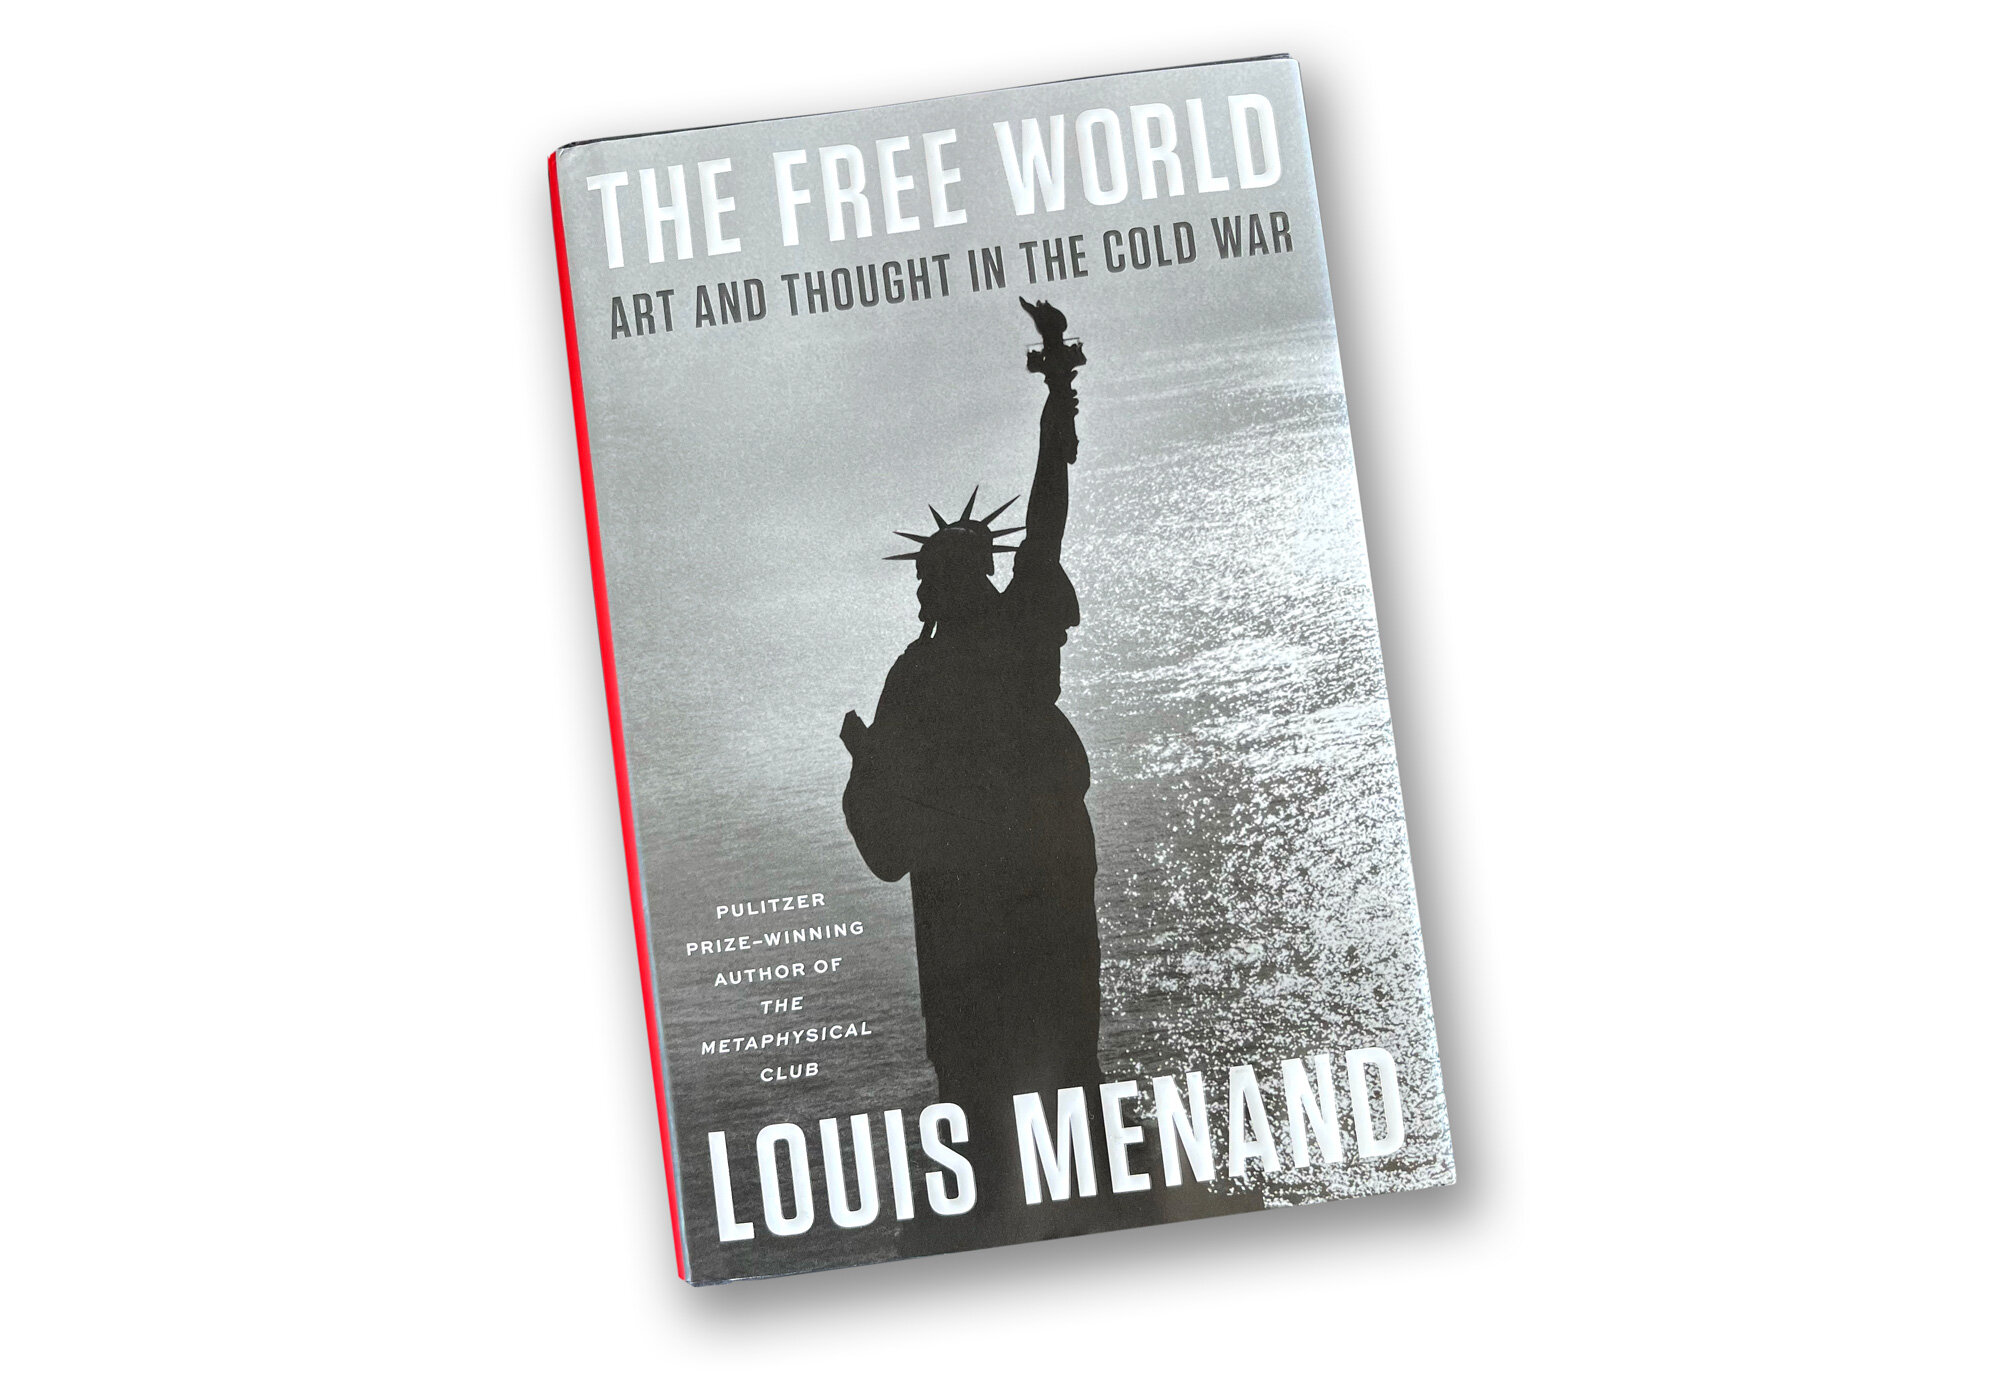 The Free World by Louis Menand